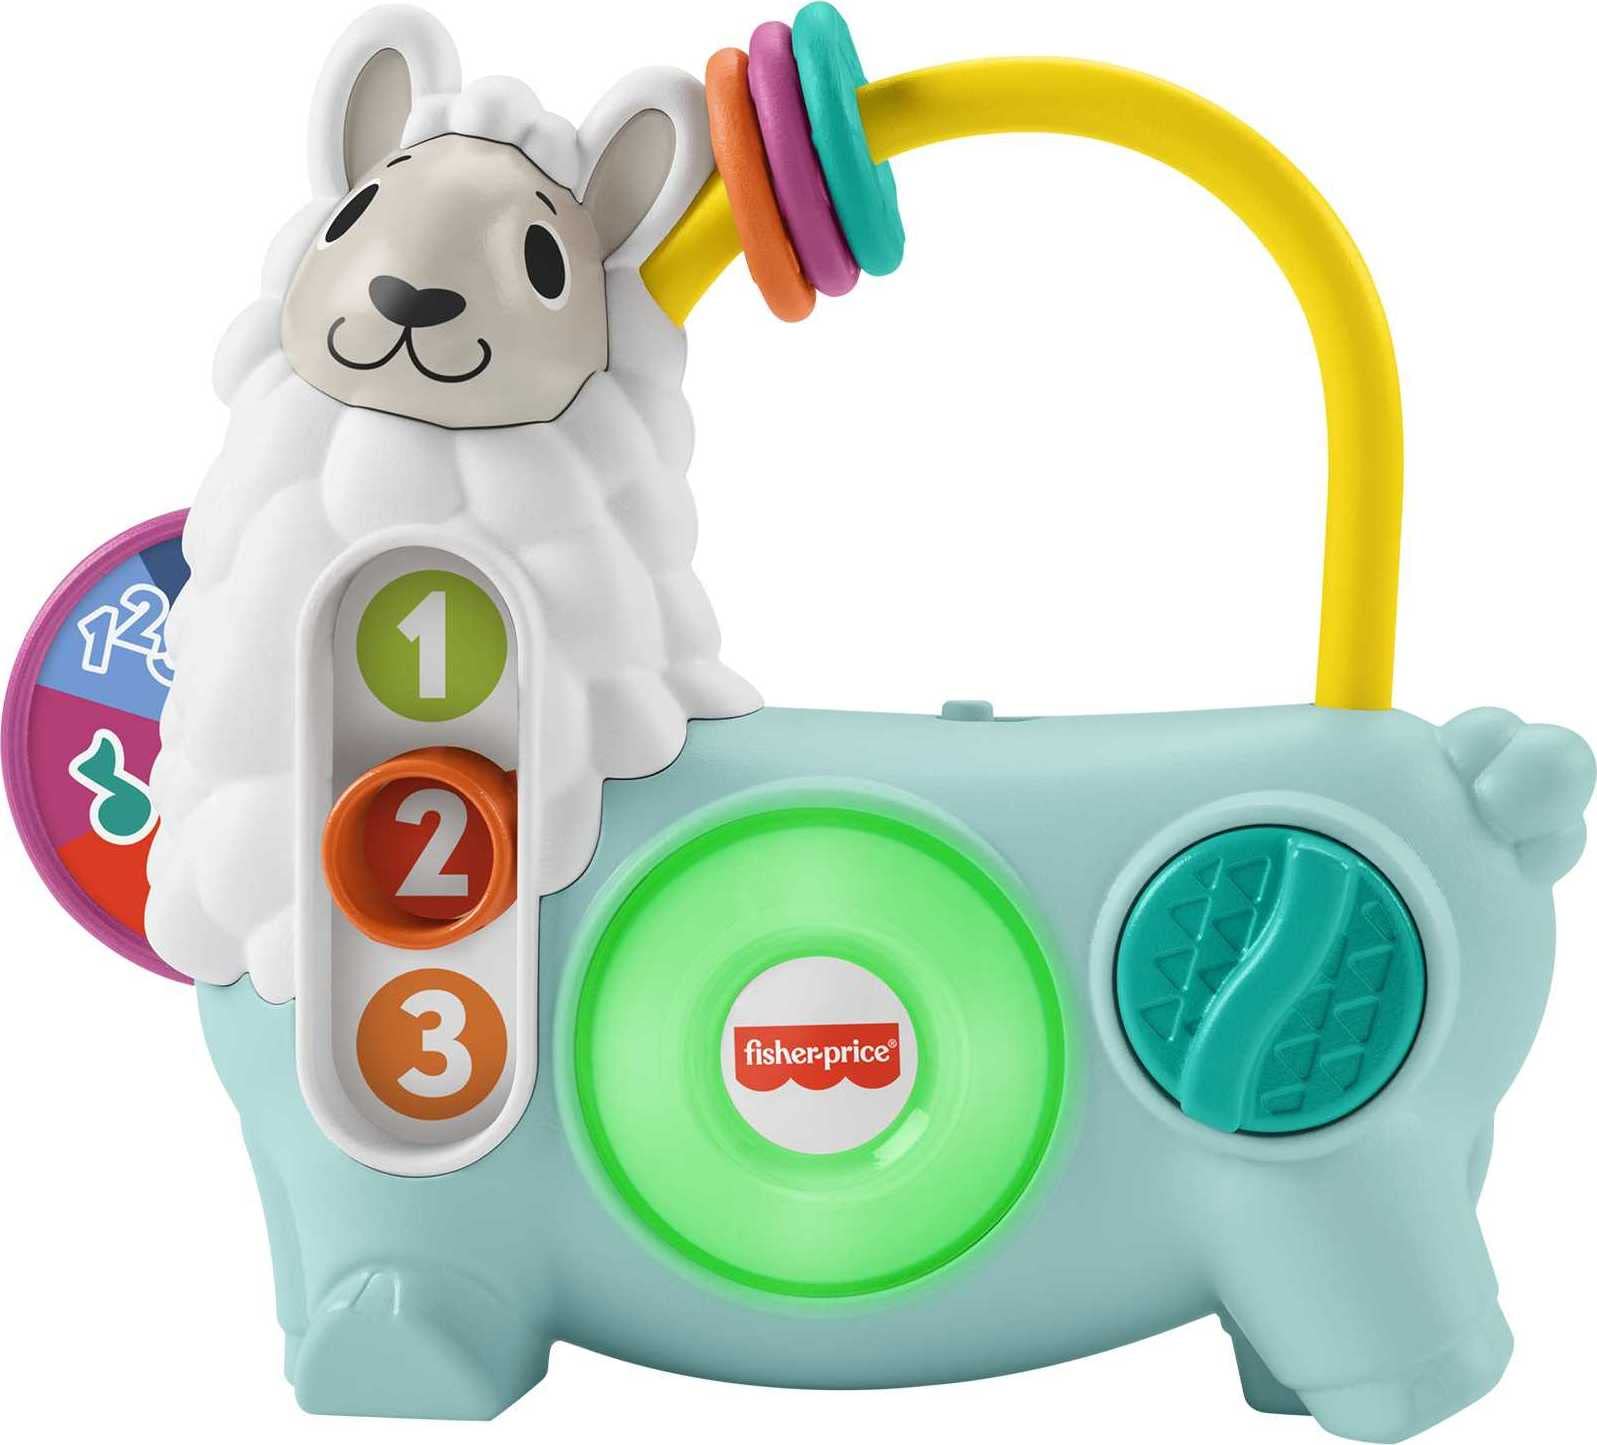 Fisher-Price Baby Linkimals Learning 123 Interactive Llama Toy w/ Lights & Music $9.50 + Free Shipping w/ Walmart+ or $35+